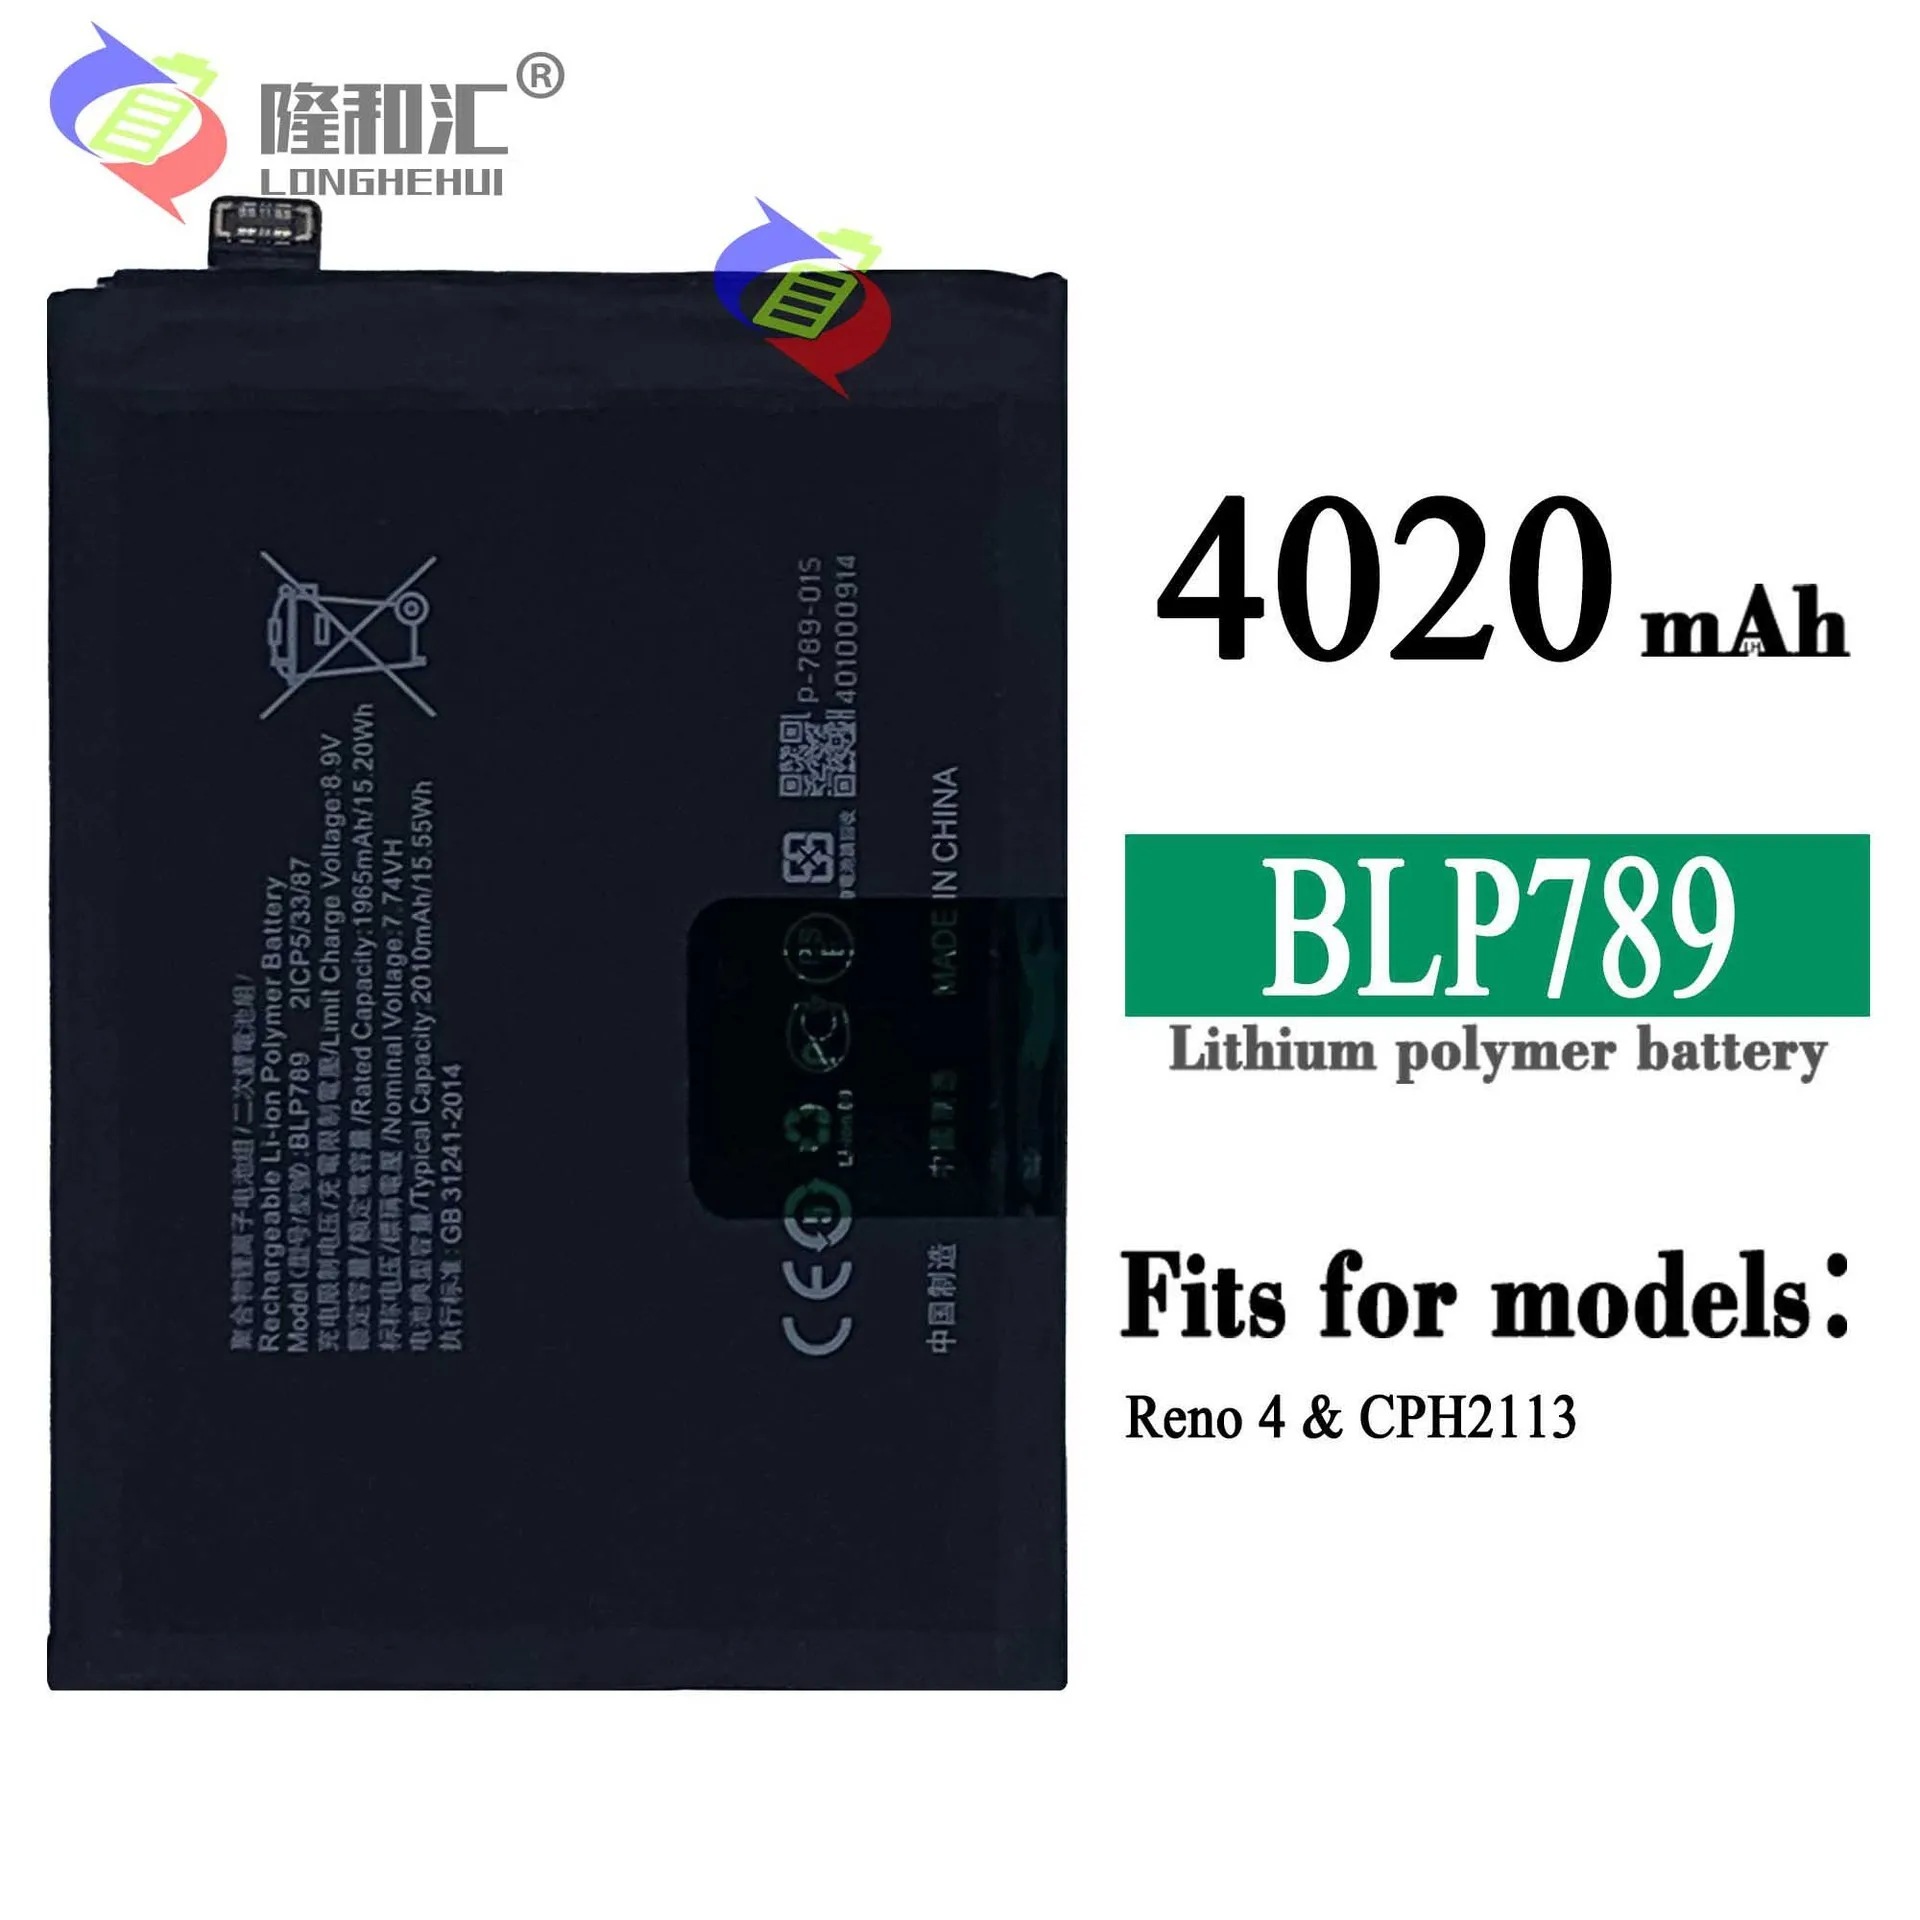 Compatible For OPPO / Reno 4 BLP789 4020mAh Phone Battery Series